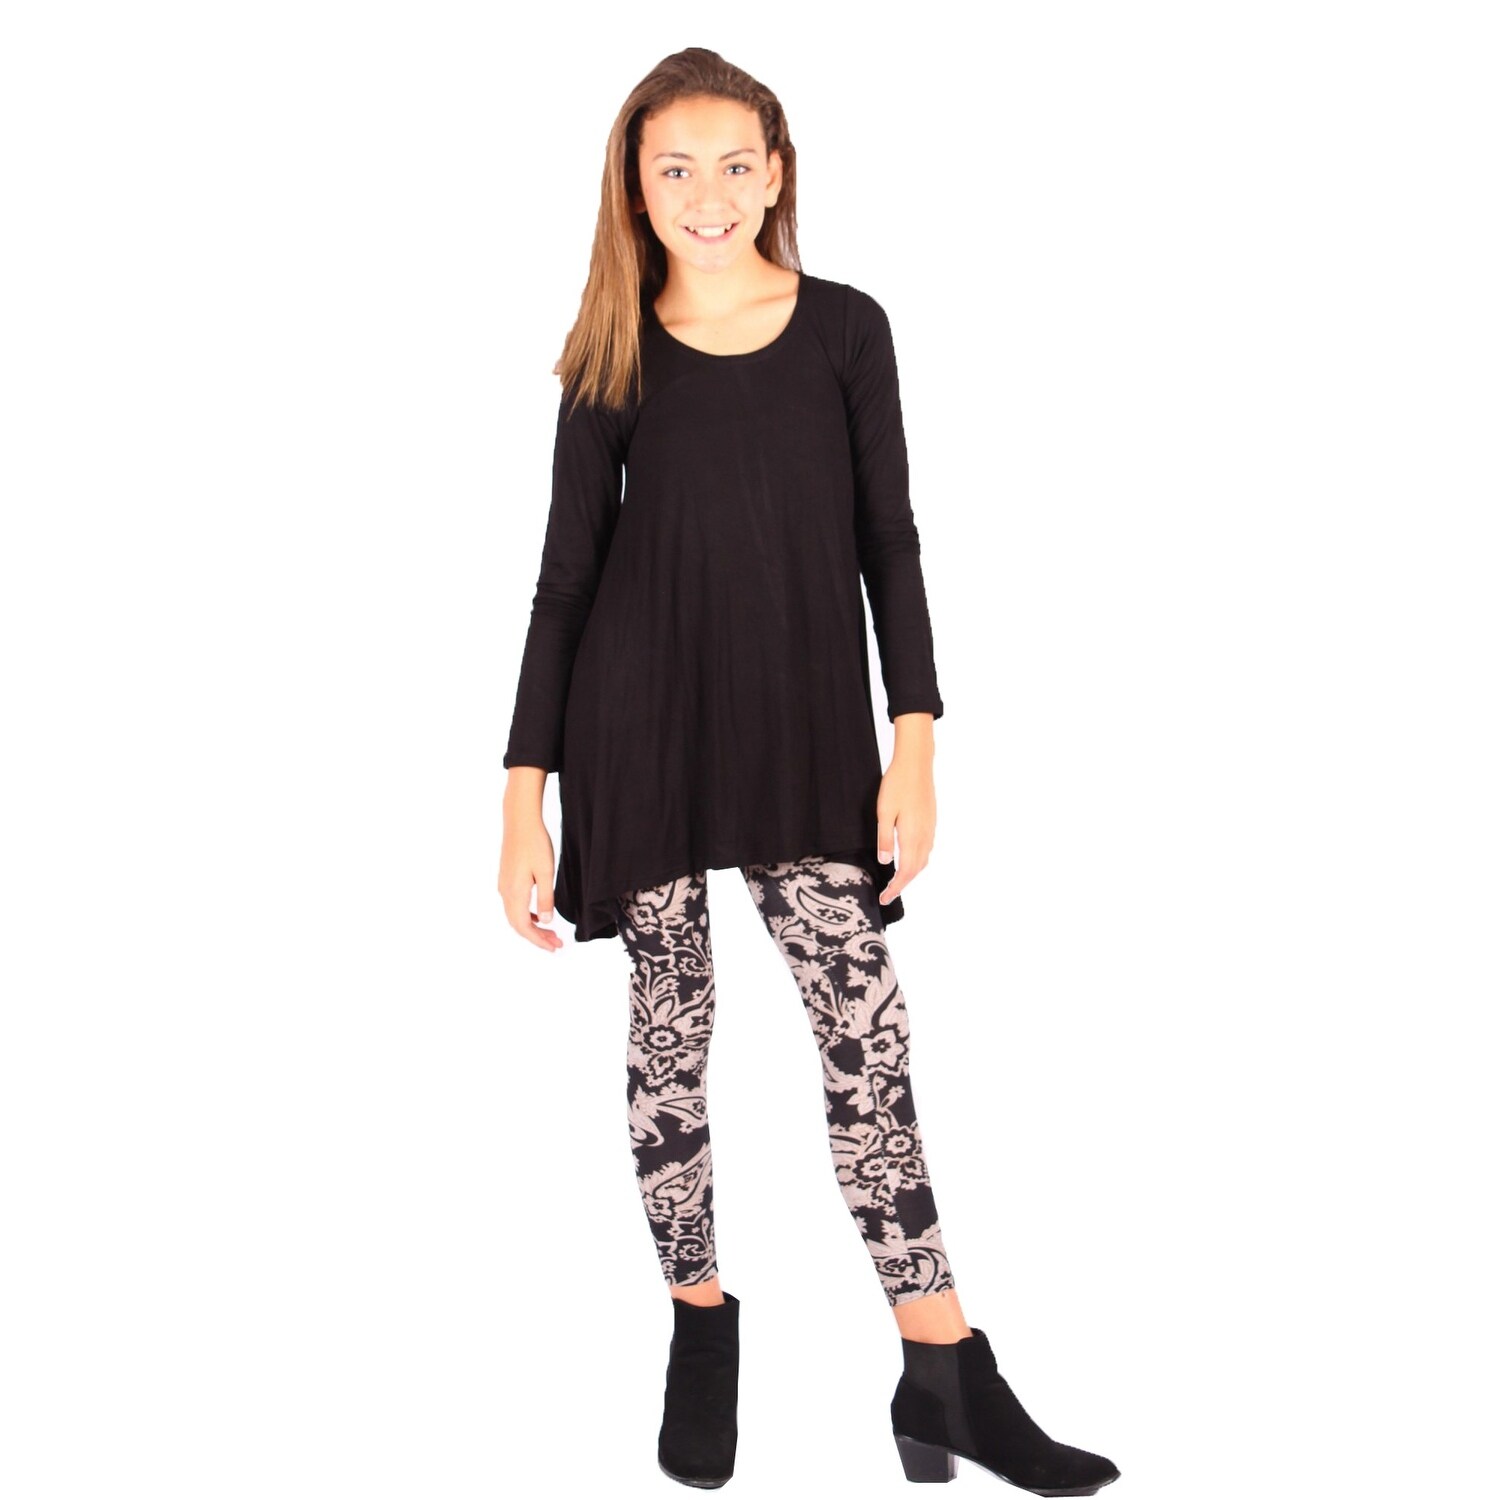 tunic outfits with leggings